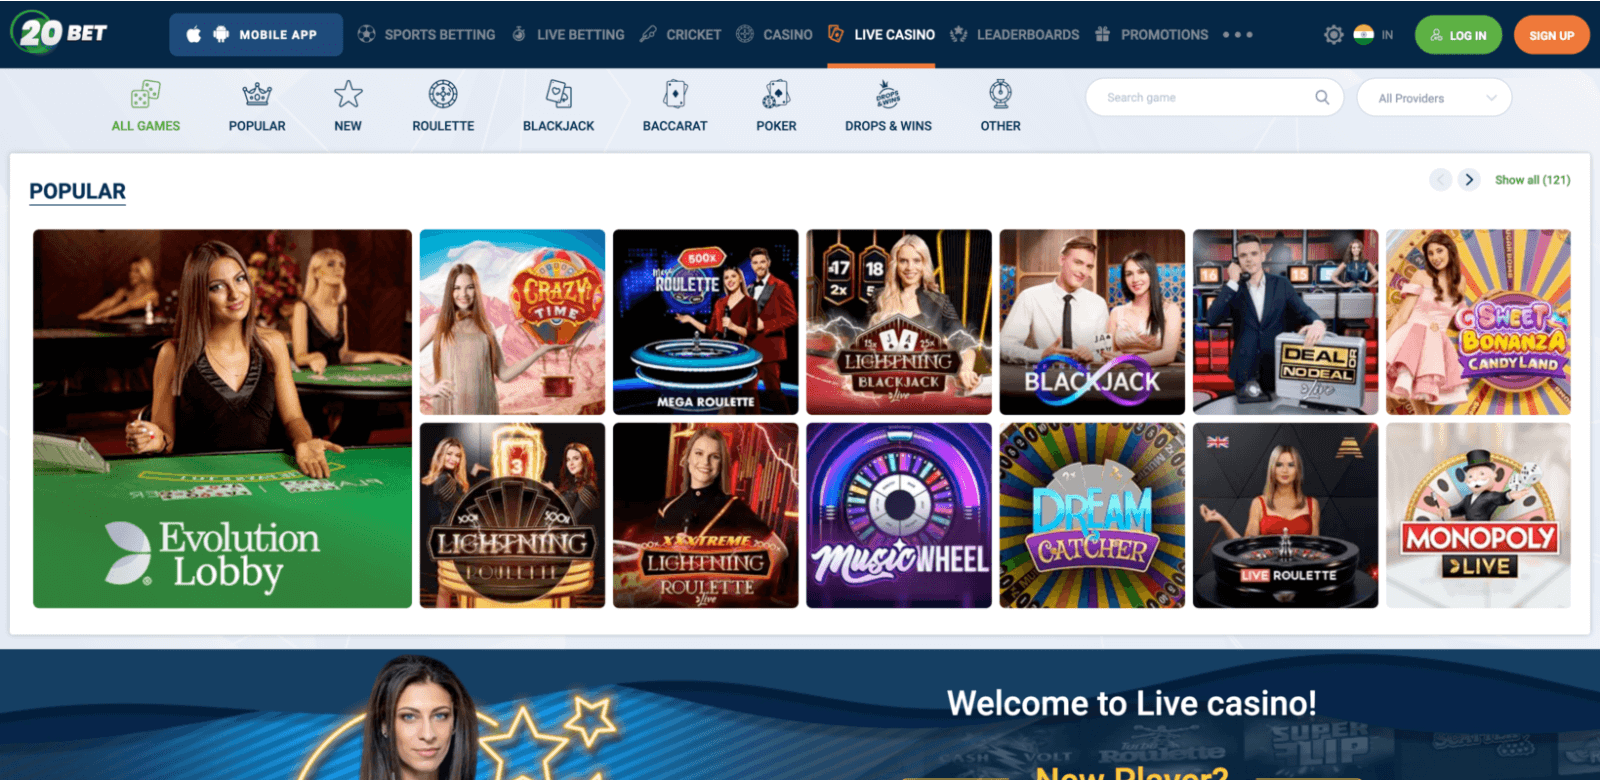 20Bet live casino section